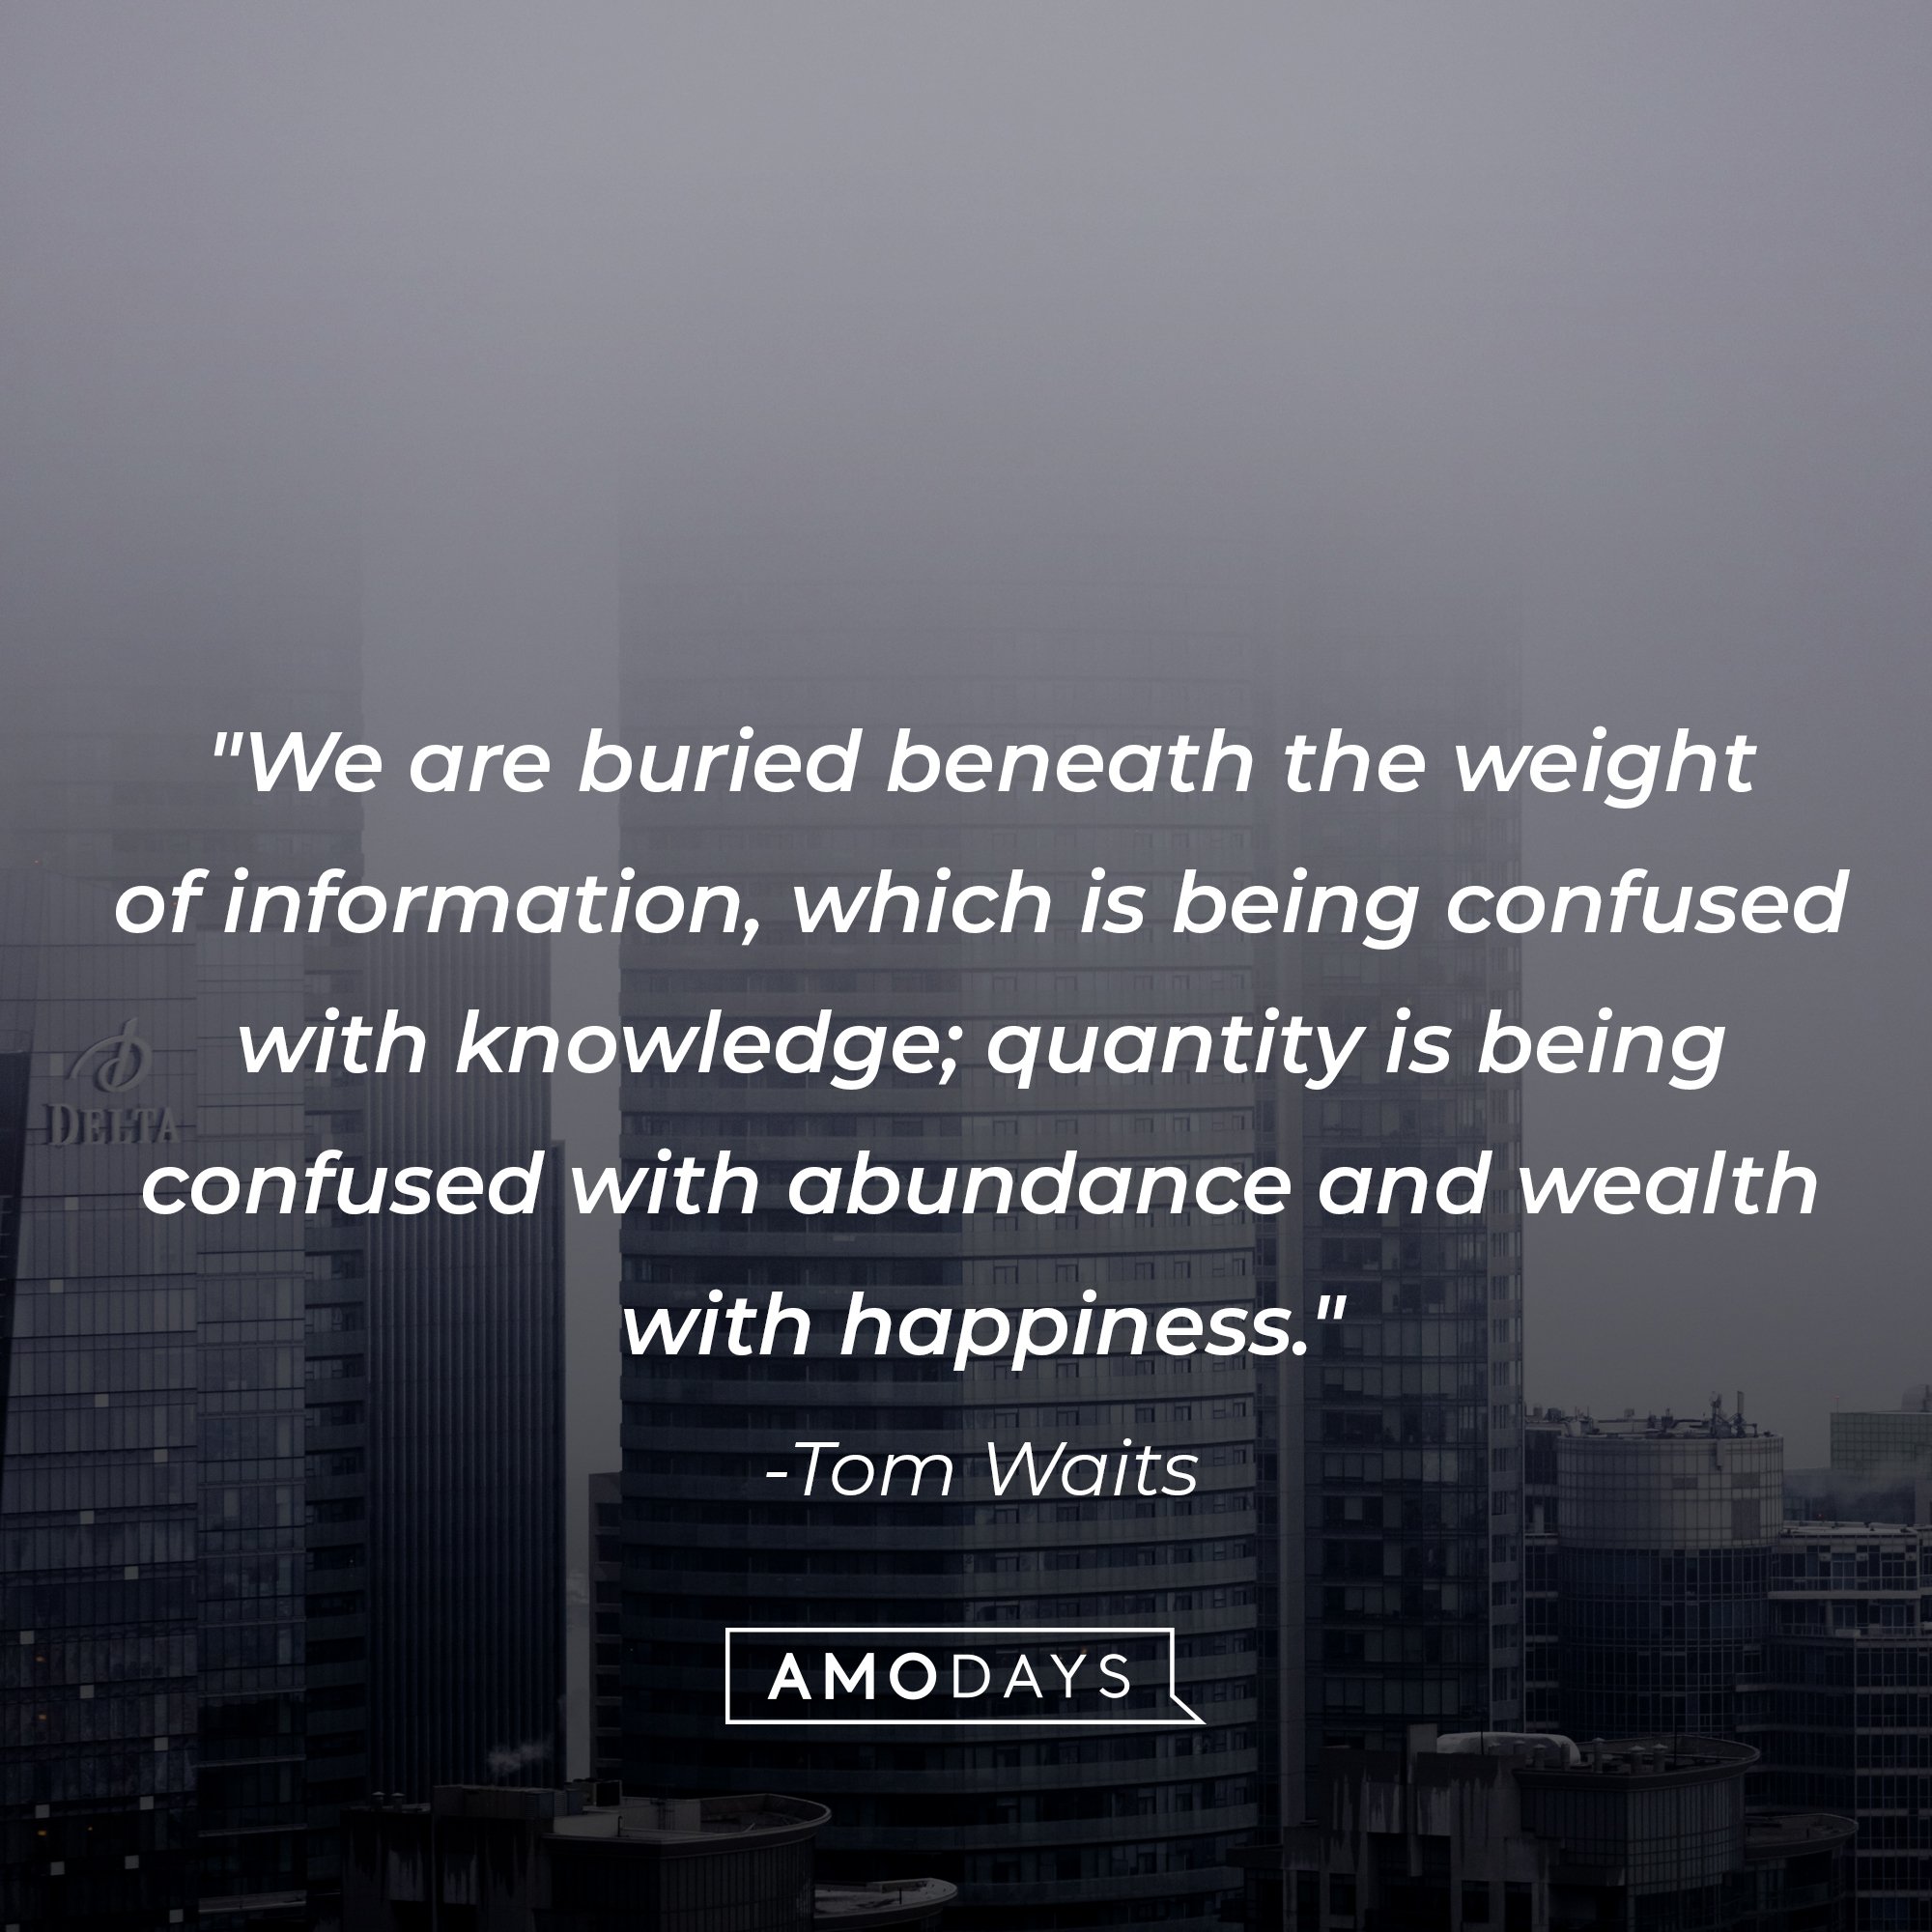 Tom Waits’ quote: "We are buried beneath the weight of information, which is being confused with knowledge; quantity is being confused with abundance and wealth with happiness." | Image: AmoDays  